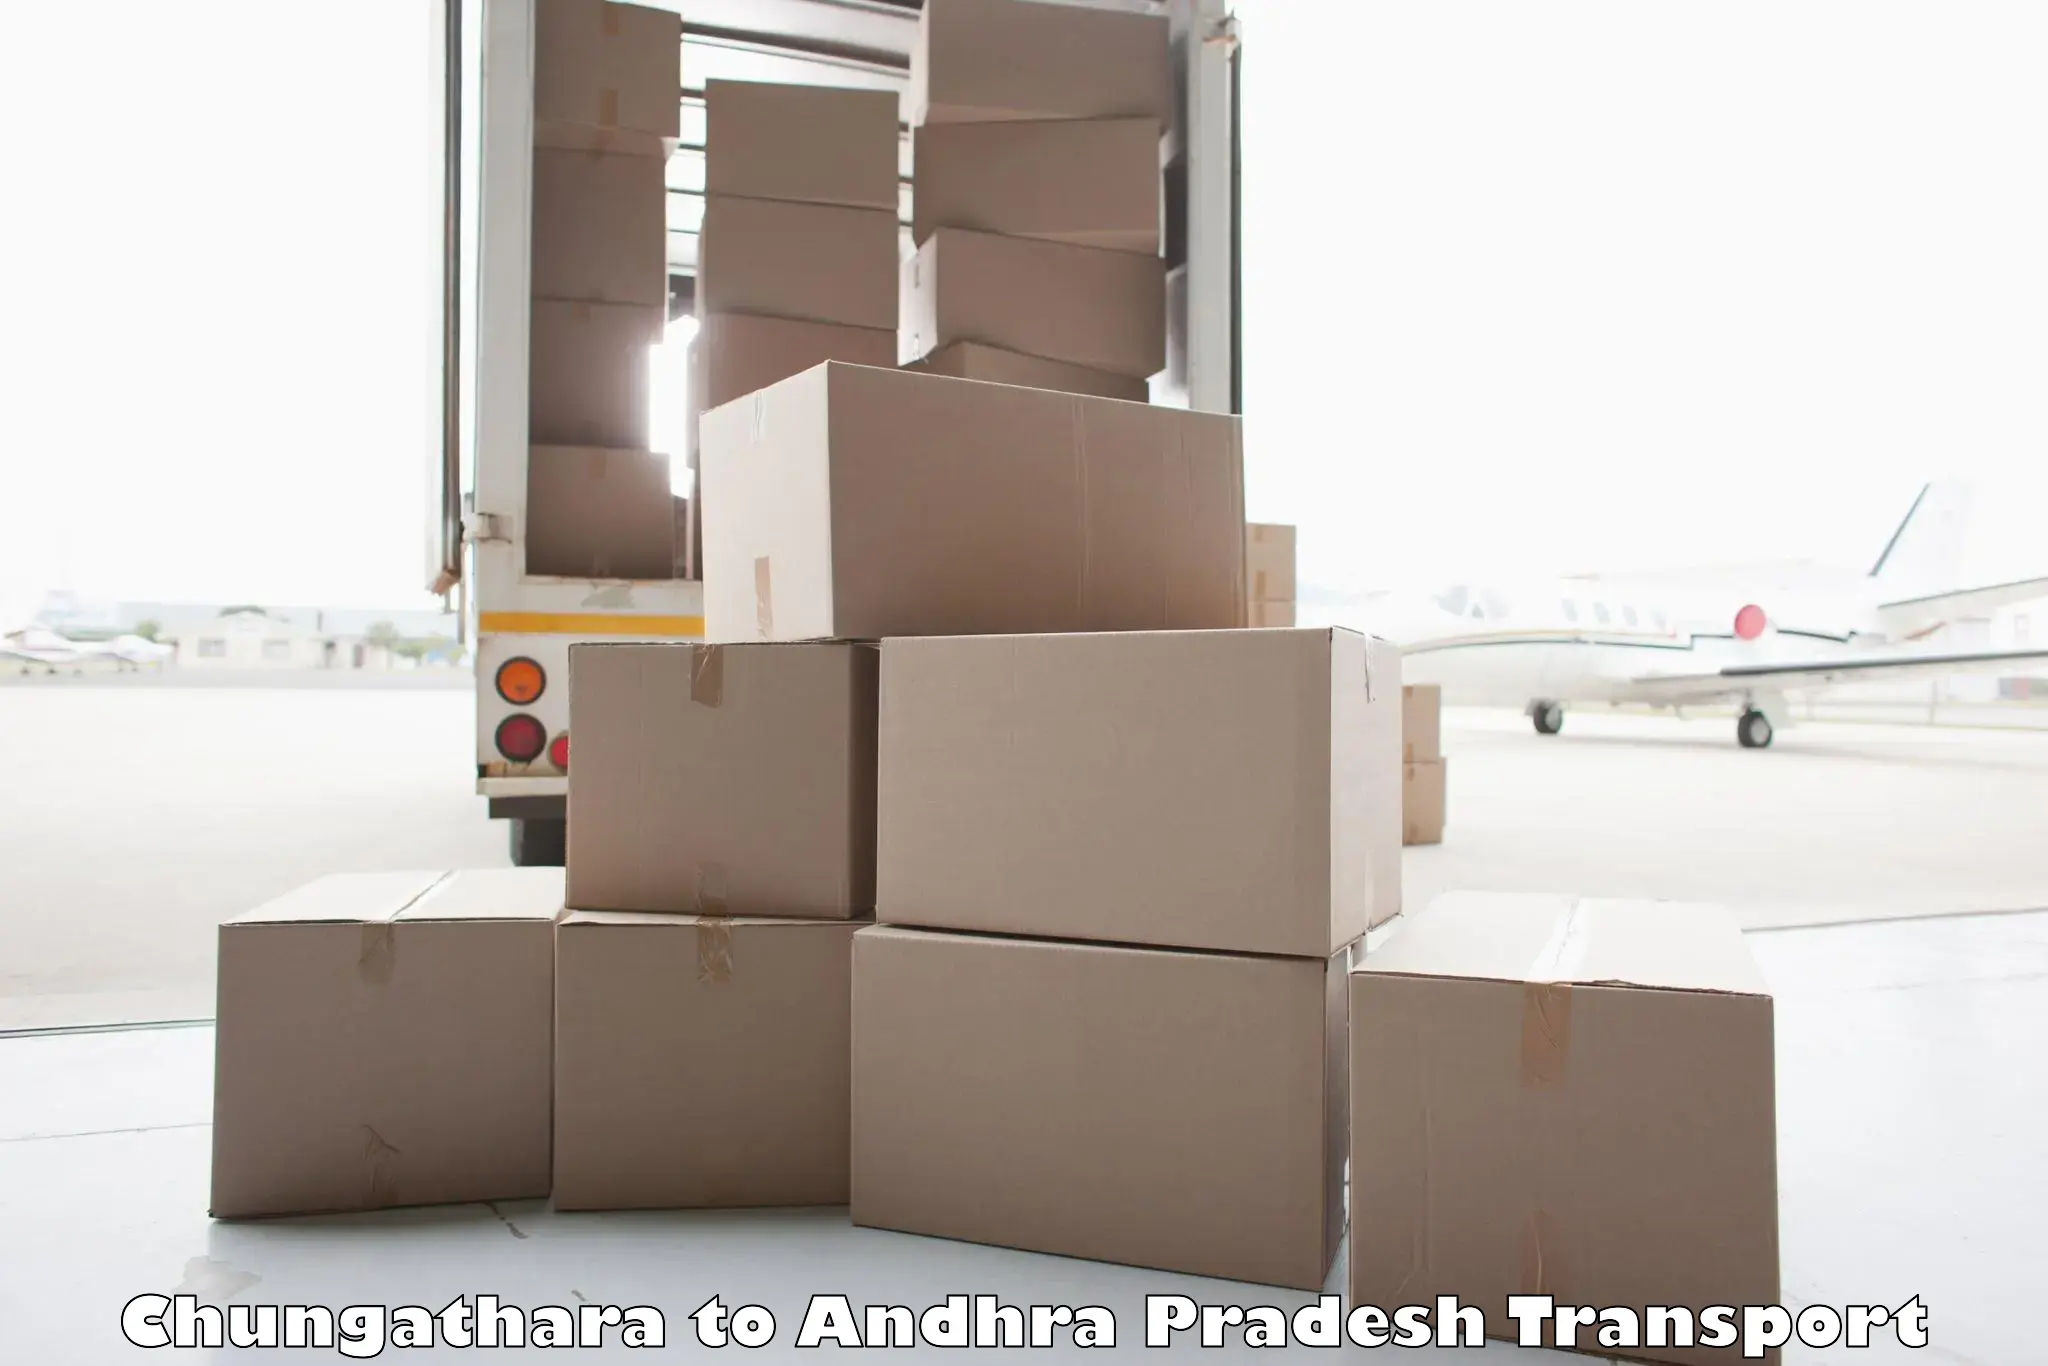 Truck transport companies in India in Chungathara to Repalle